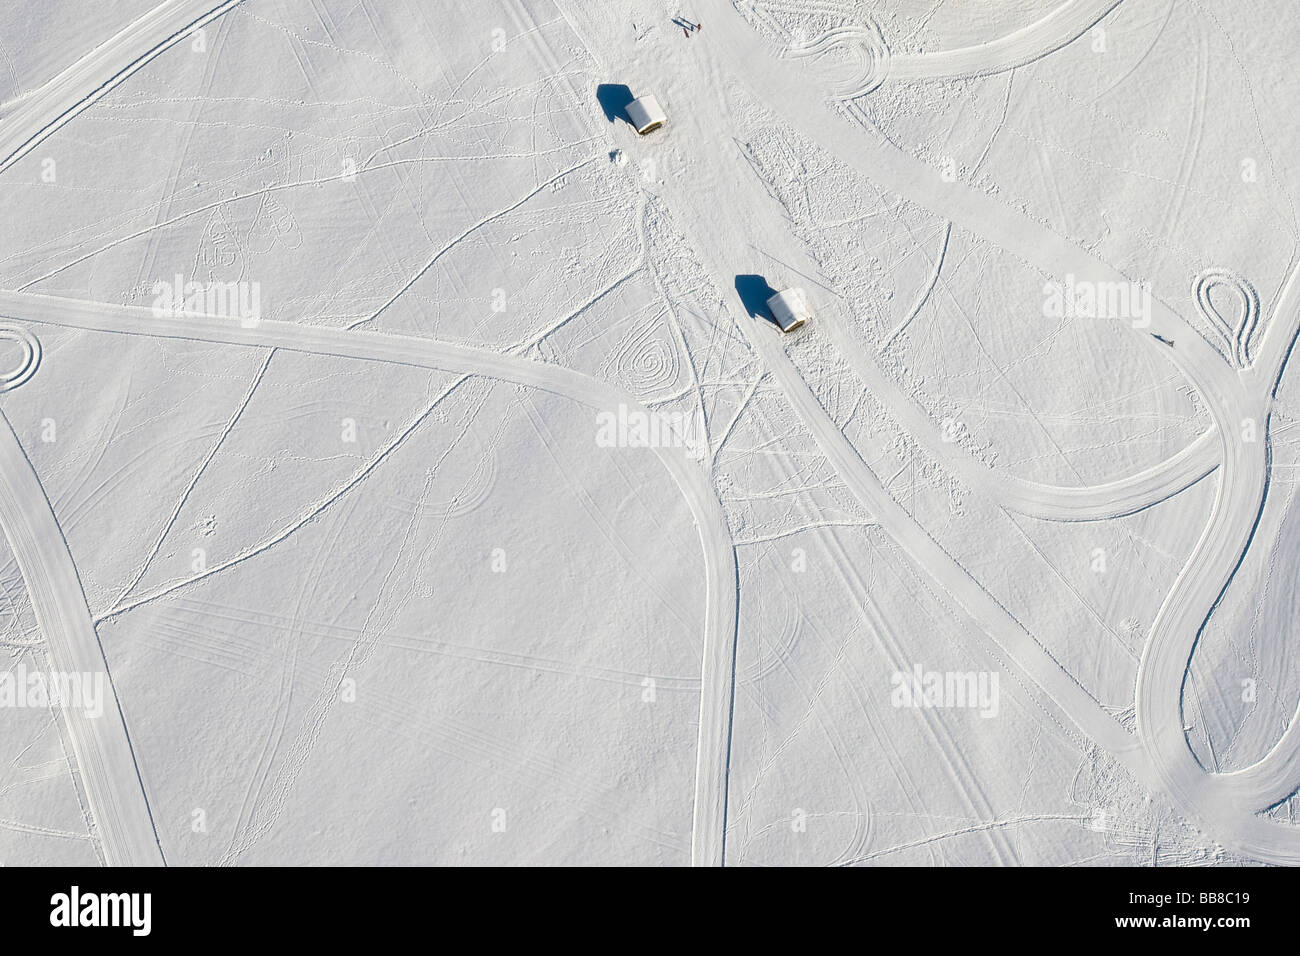 Two sheds in snow surrounded by ski tracks and cross-country ski runs, Chiemgau, Upper Bavaria, Bavaria, Germany Stock Photo